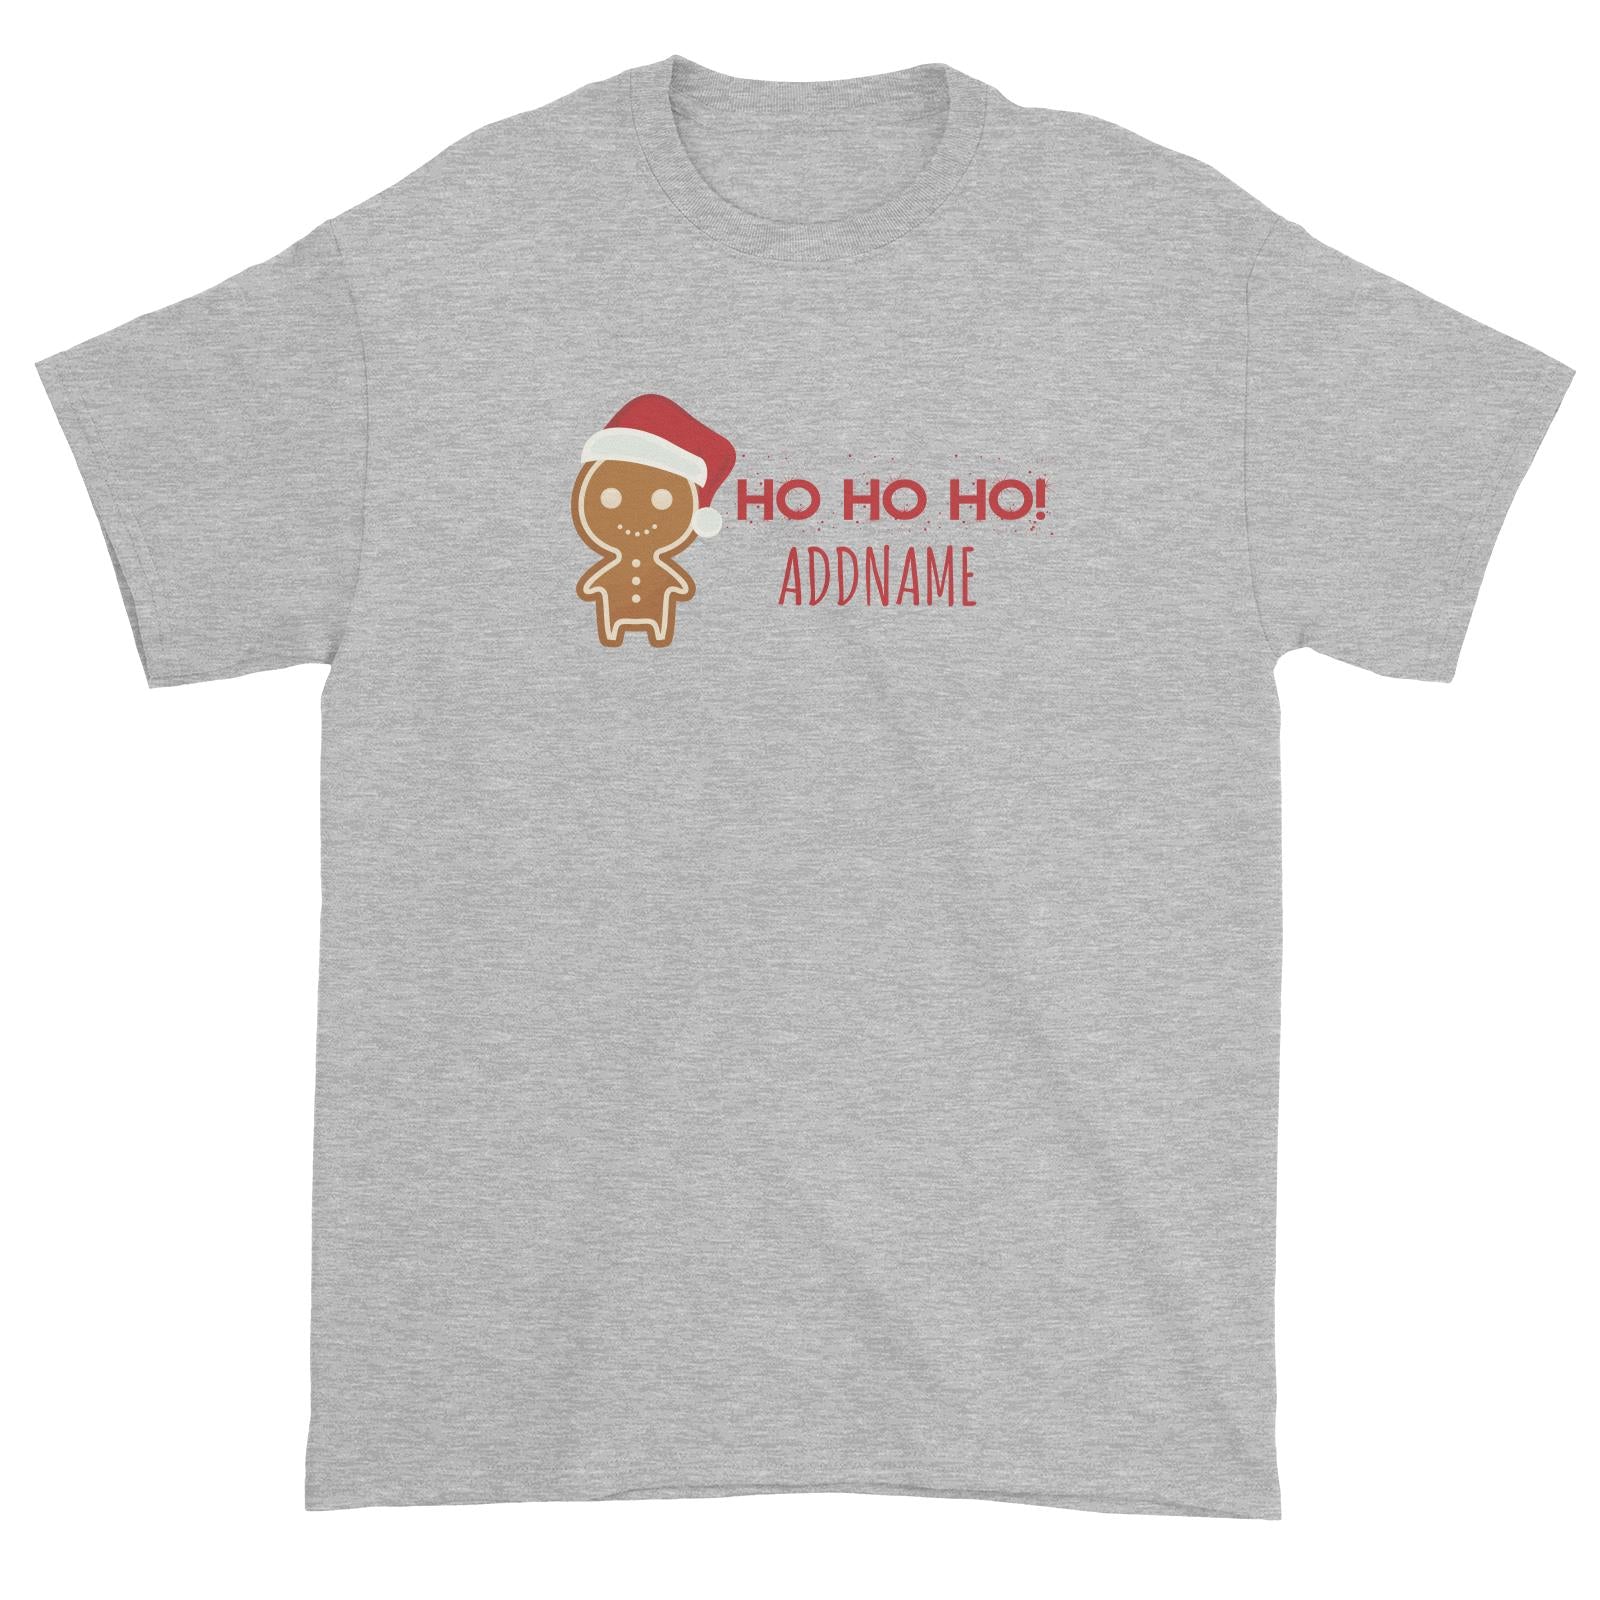 Cute Gingerbread Man with Santa Hat Addname Unisex T-Shirt Christmas Matching Family Lettering Personalizable Designs